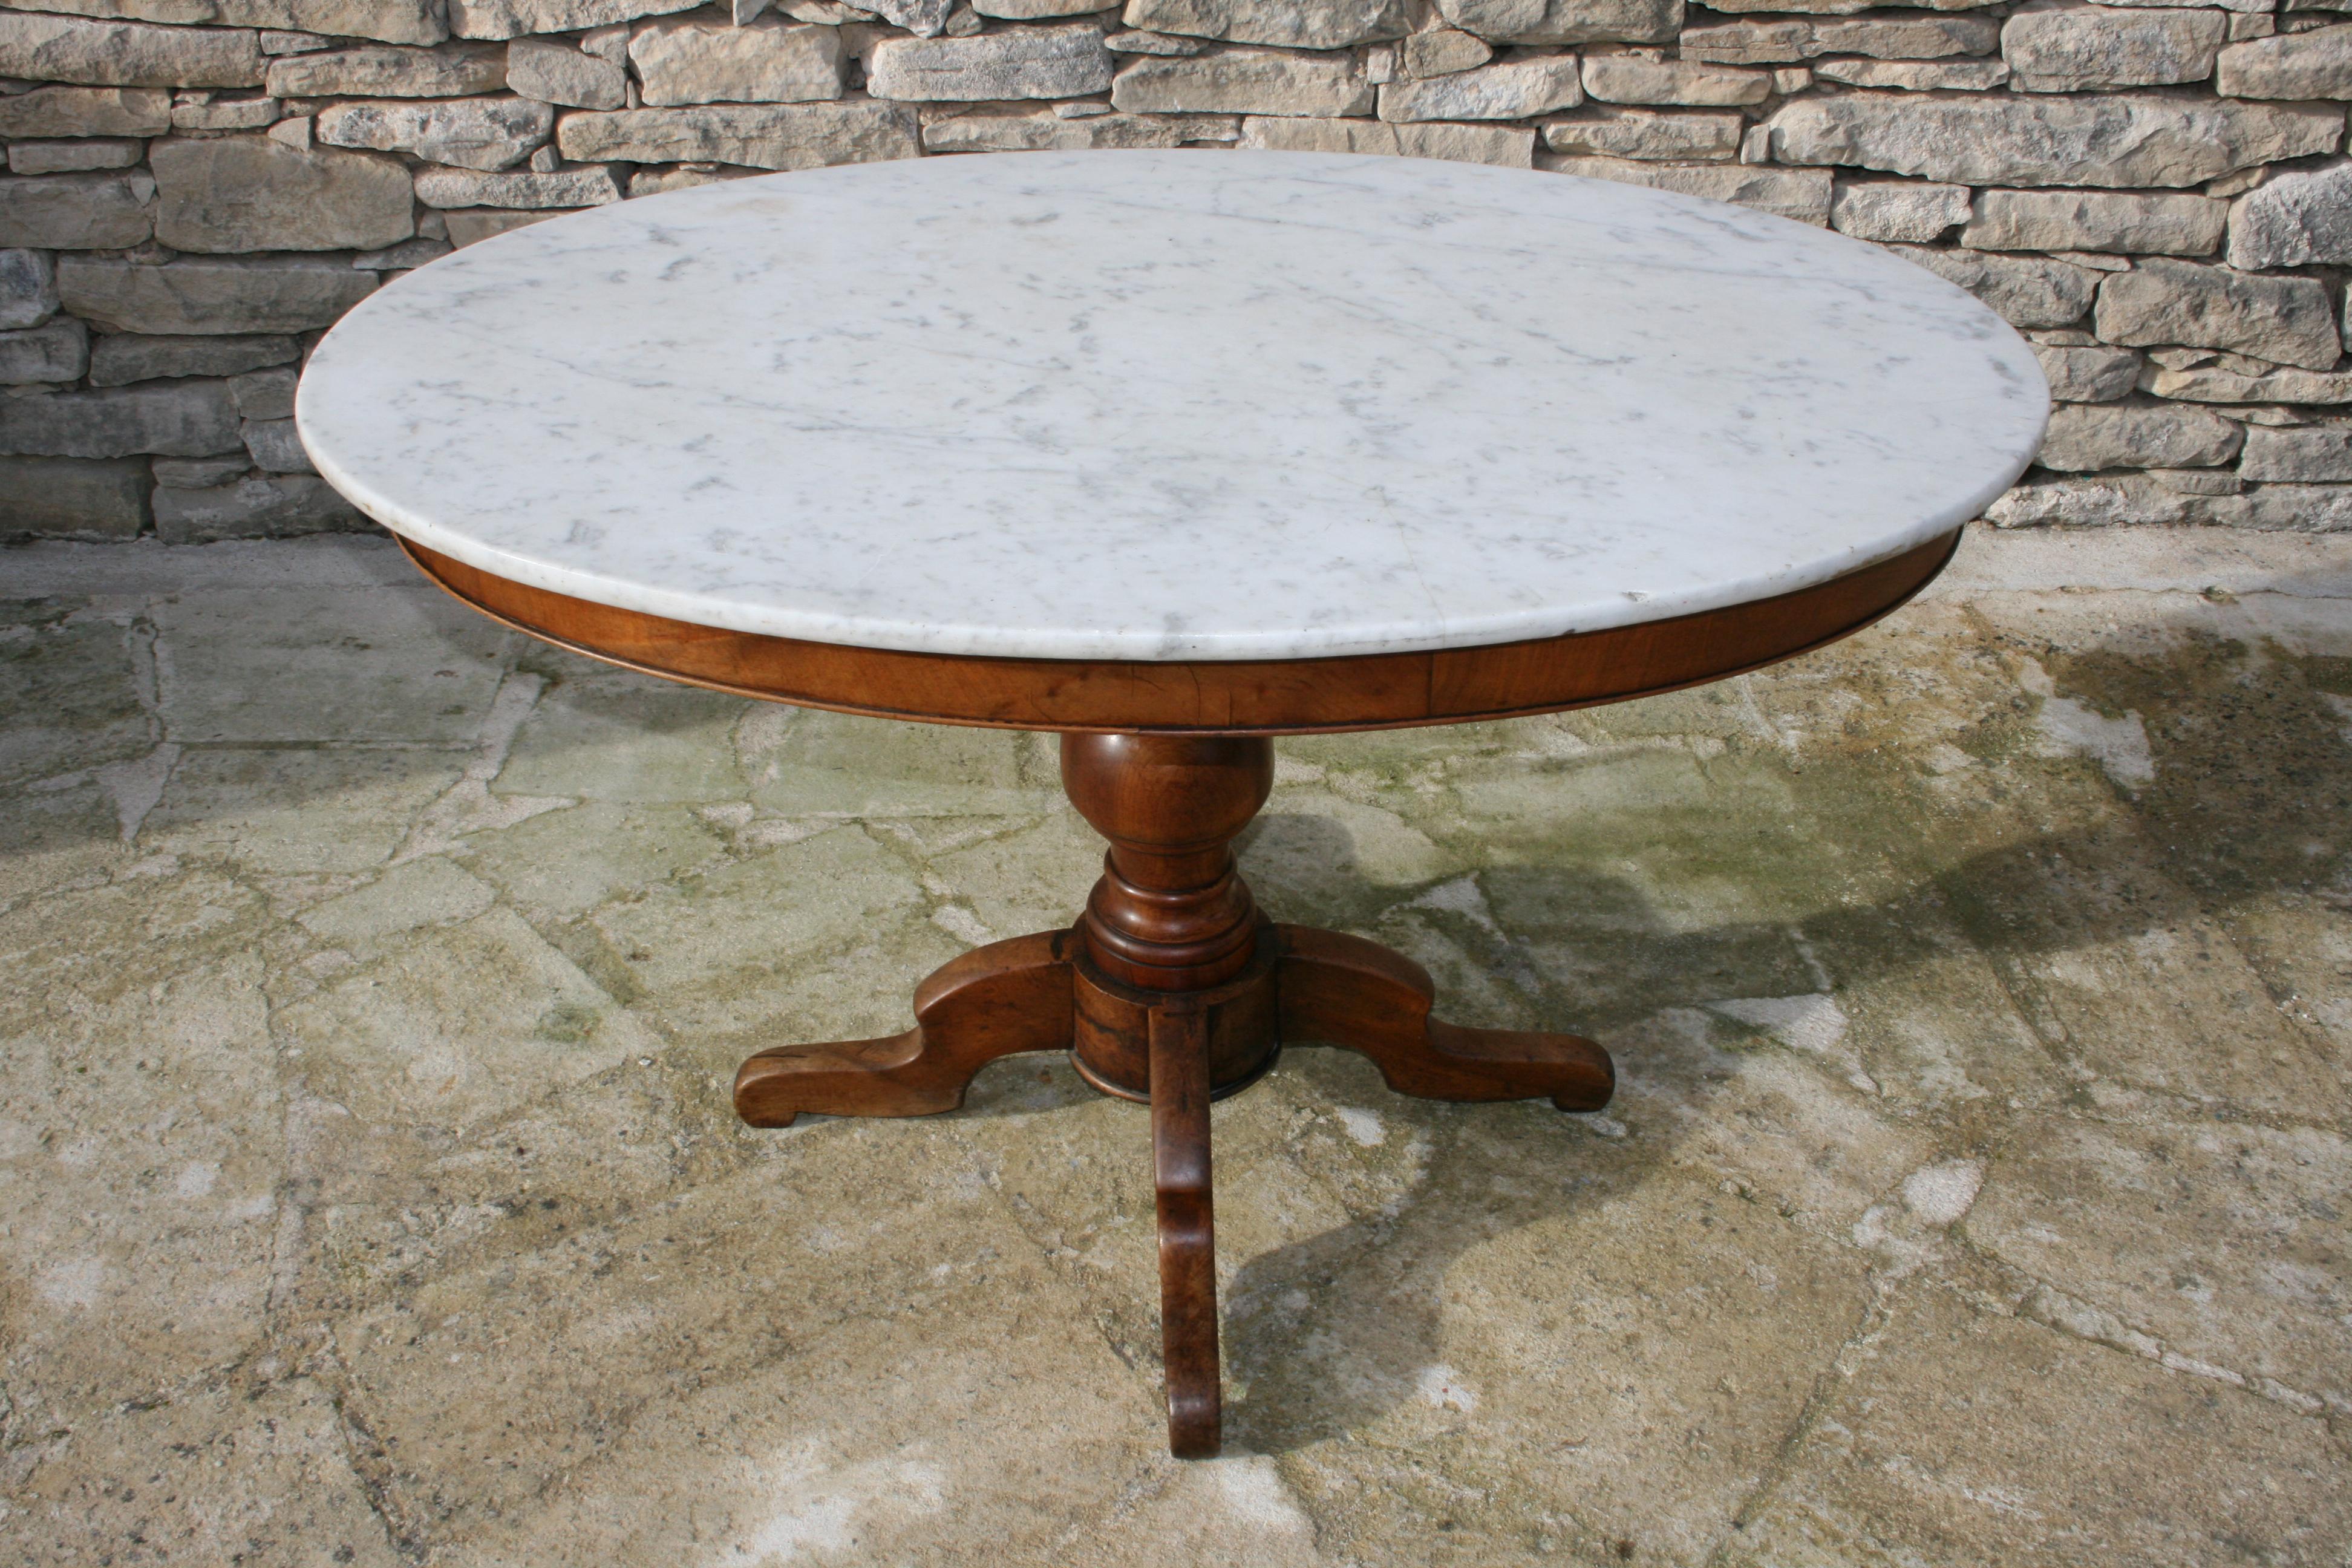 Attractive and practical, 19th century country French side, occasional or tea table. A good size with carved pedestal base and original oval marble top.